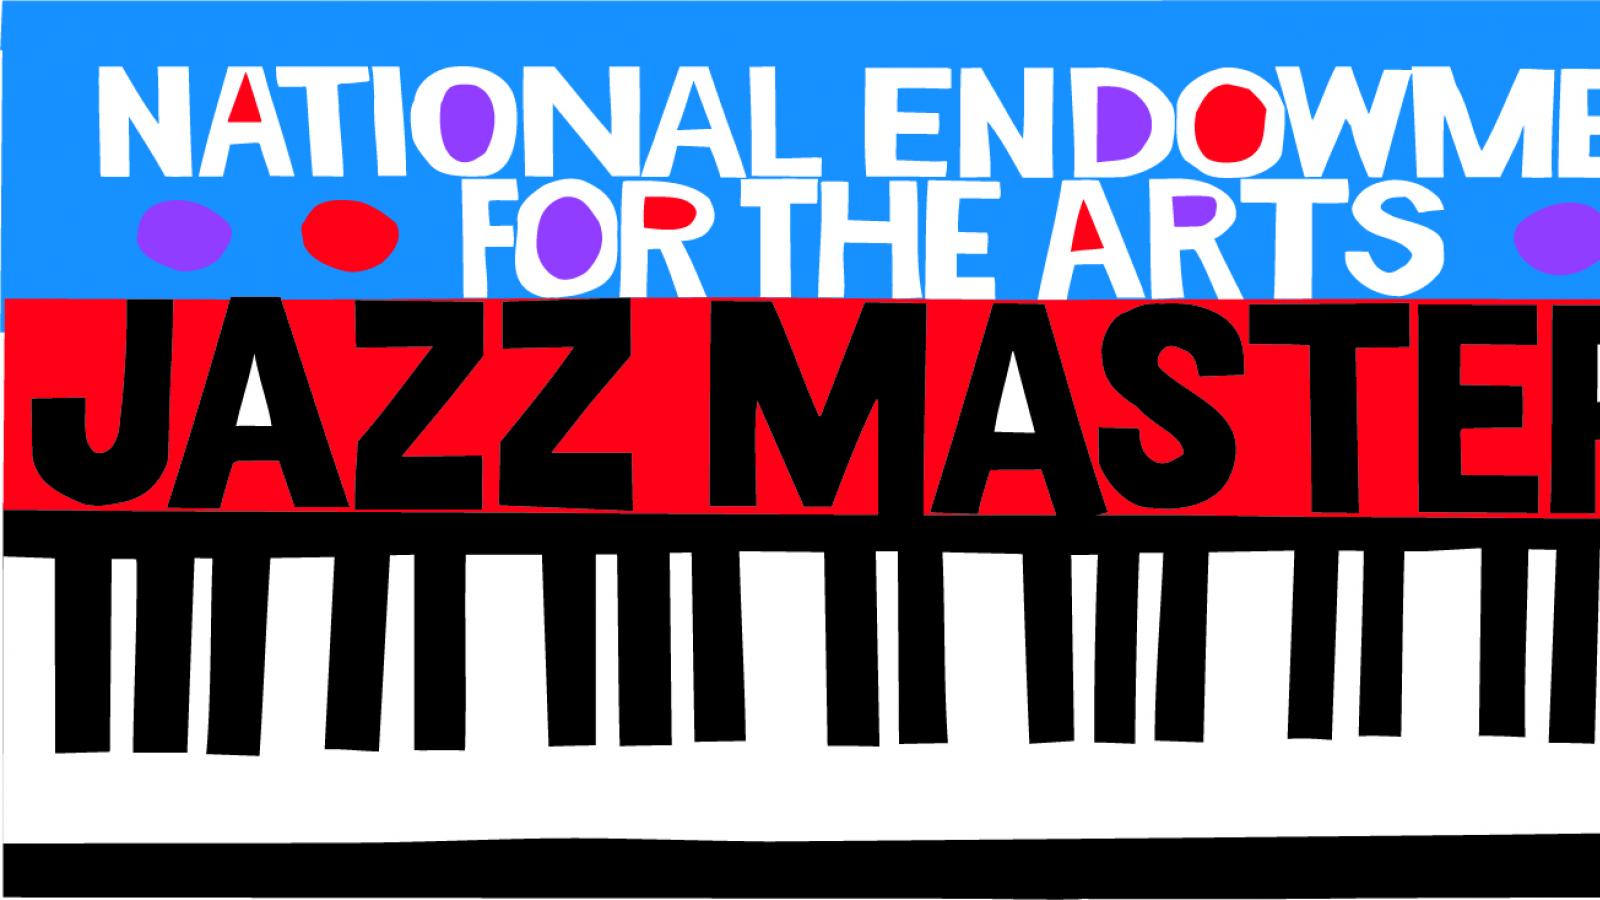 National Endowment for the Arts Jazz Masters Logo